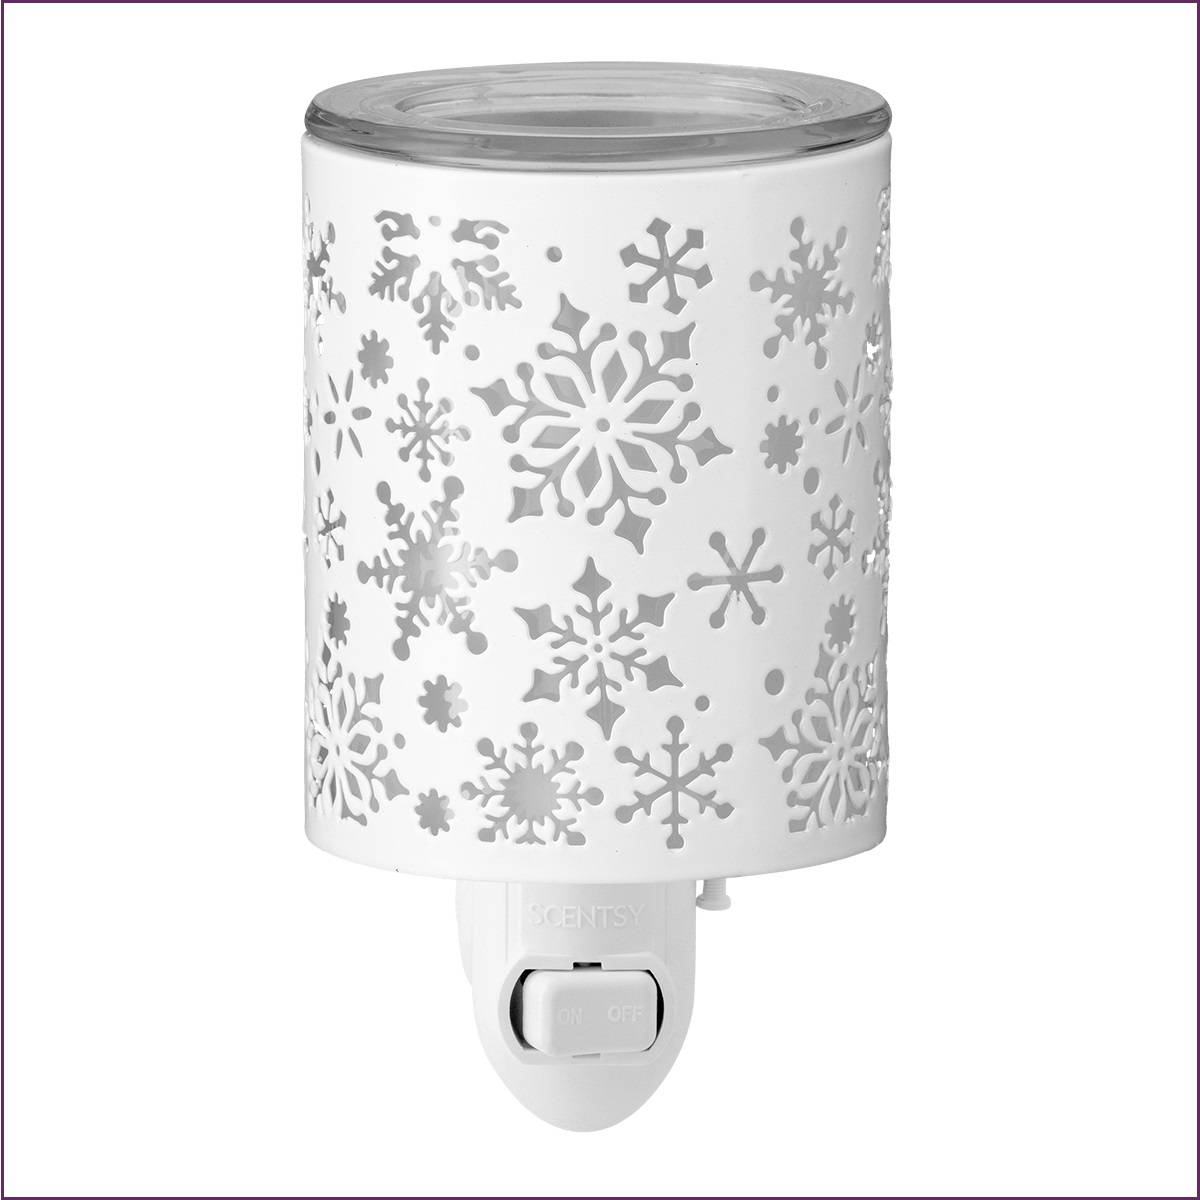 Catching Snowflakes Scentsy Mini Warmer | Stock Off